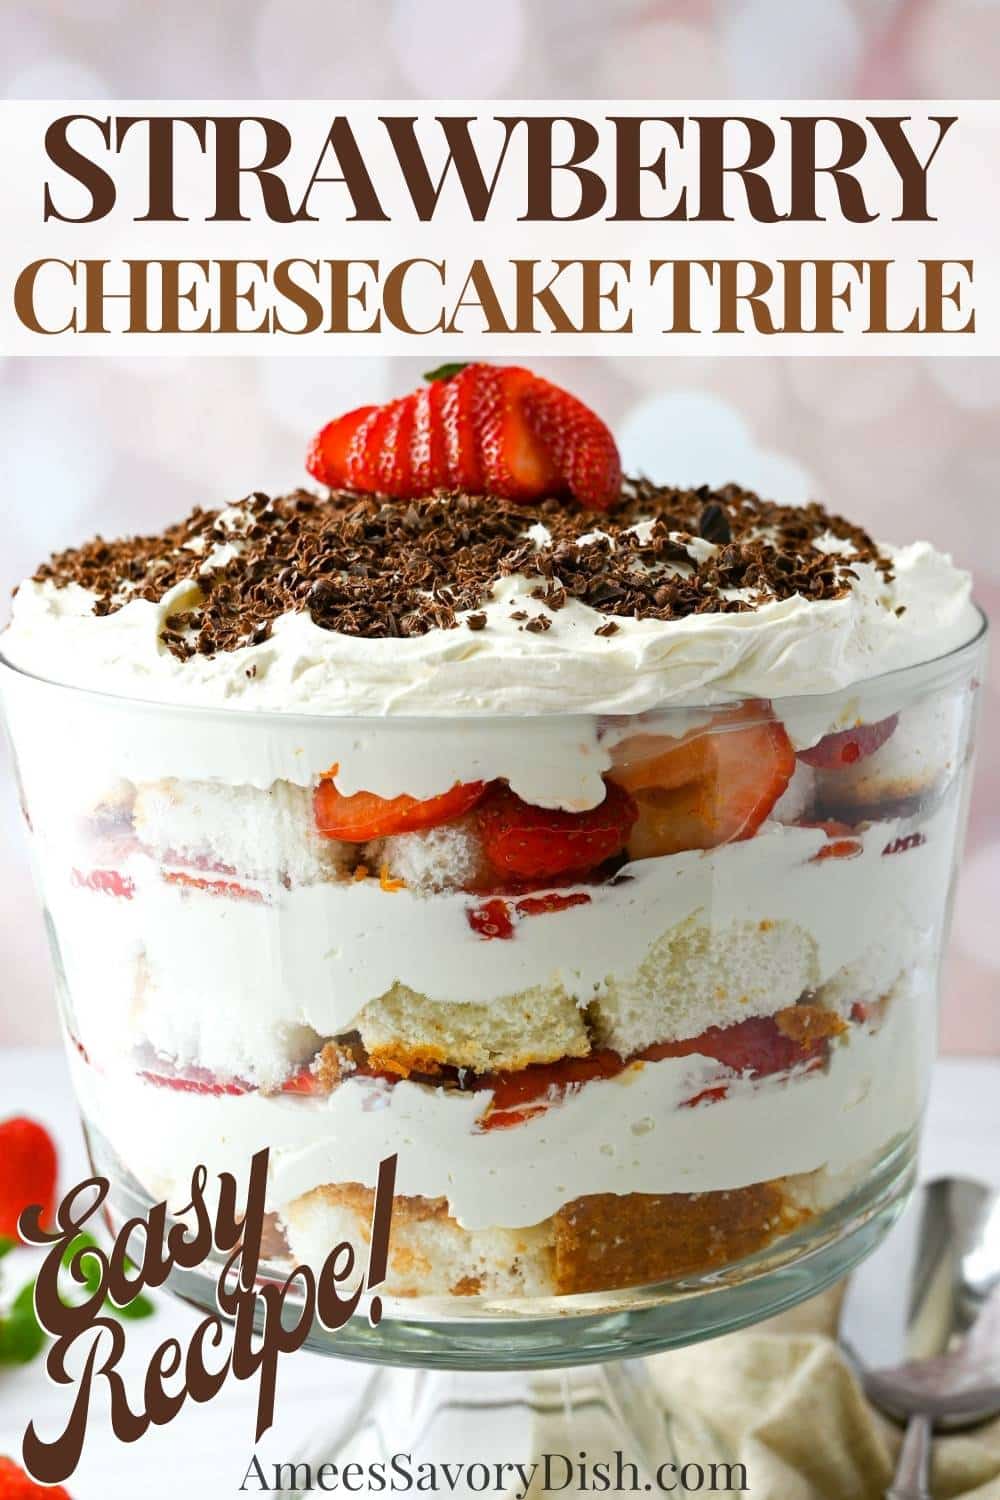 This Strawberry Cheesecake Trifle showcases layered cake, strawberries, and a creamy cheesecake filling. Gluten-free variation included. via @Ameessavorydish